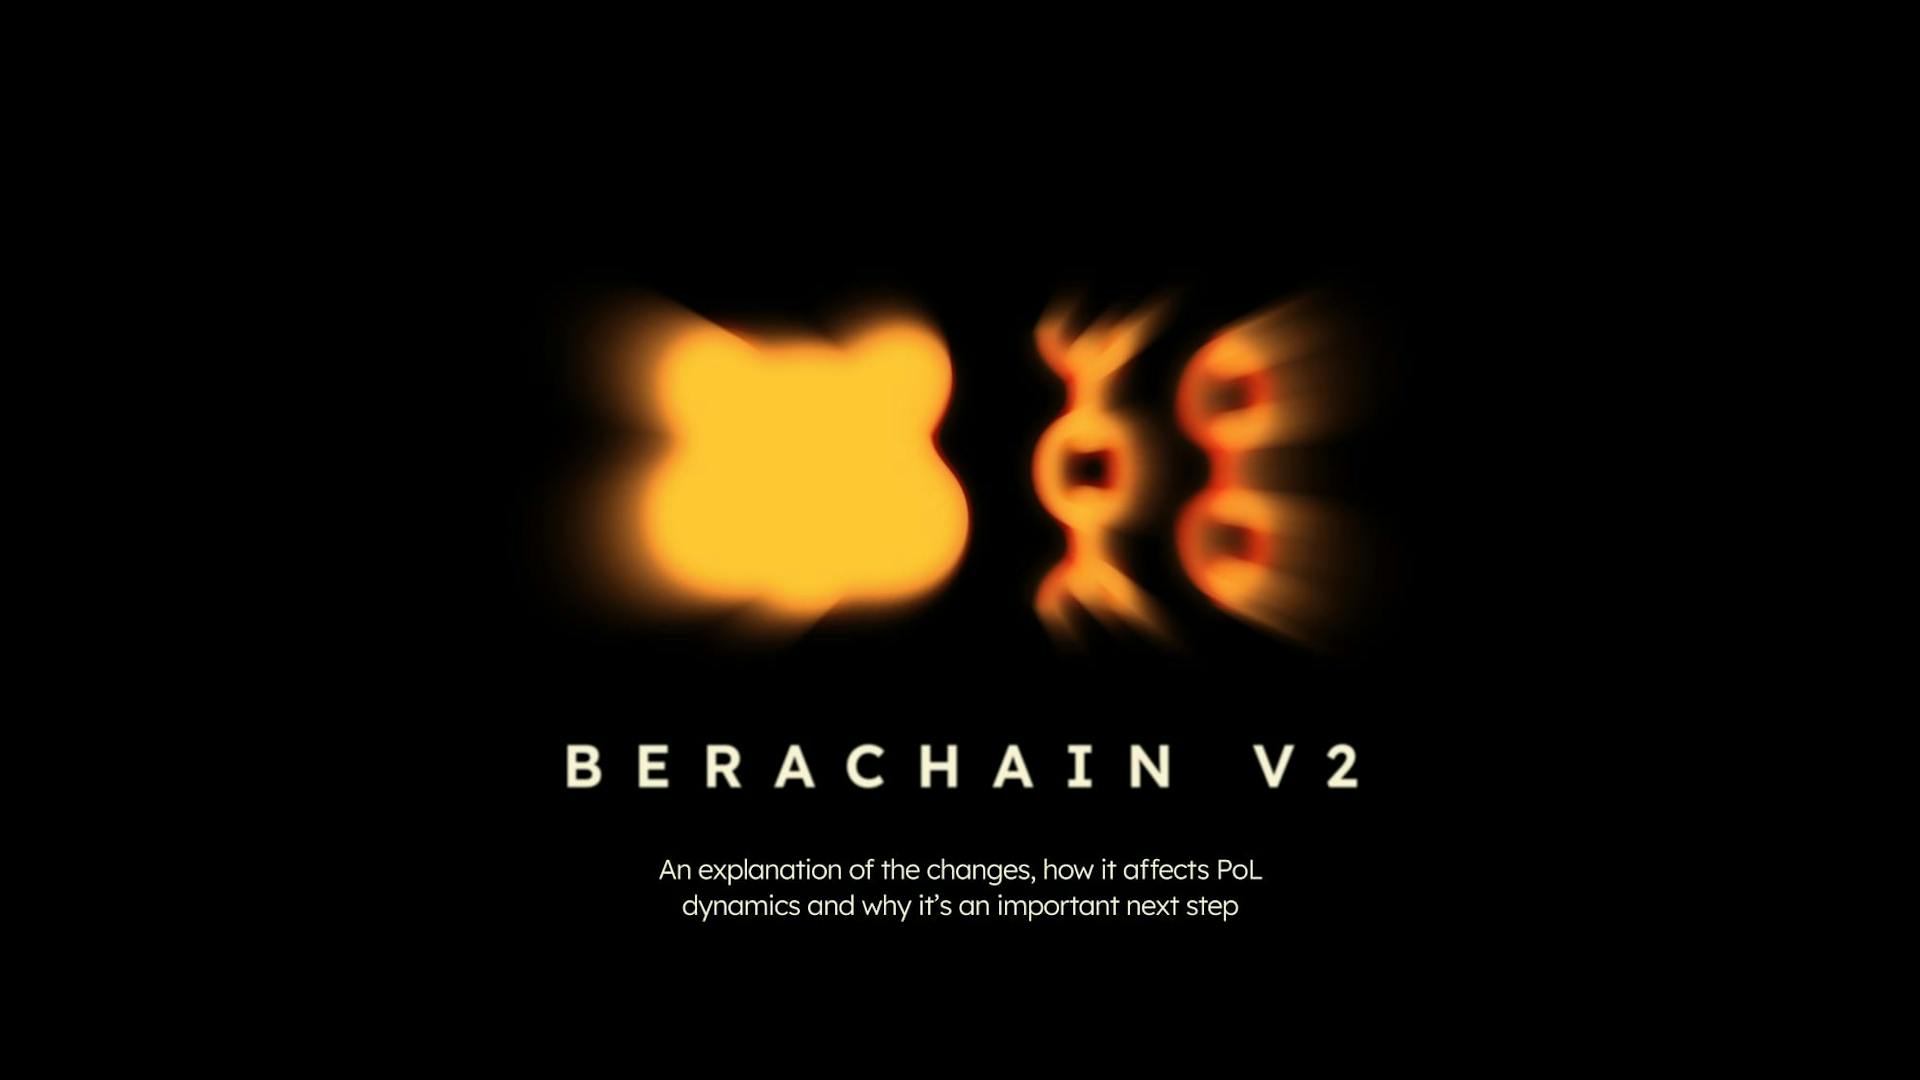 Berachain V2: An explanation of the changes, how it affects PoL dynamics and why it’s an important next step